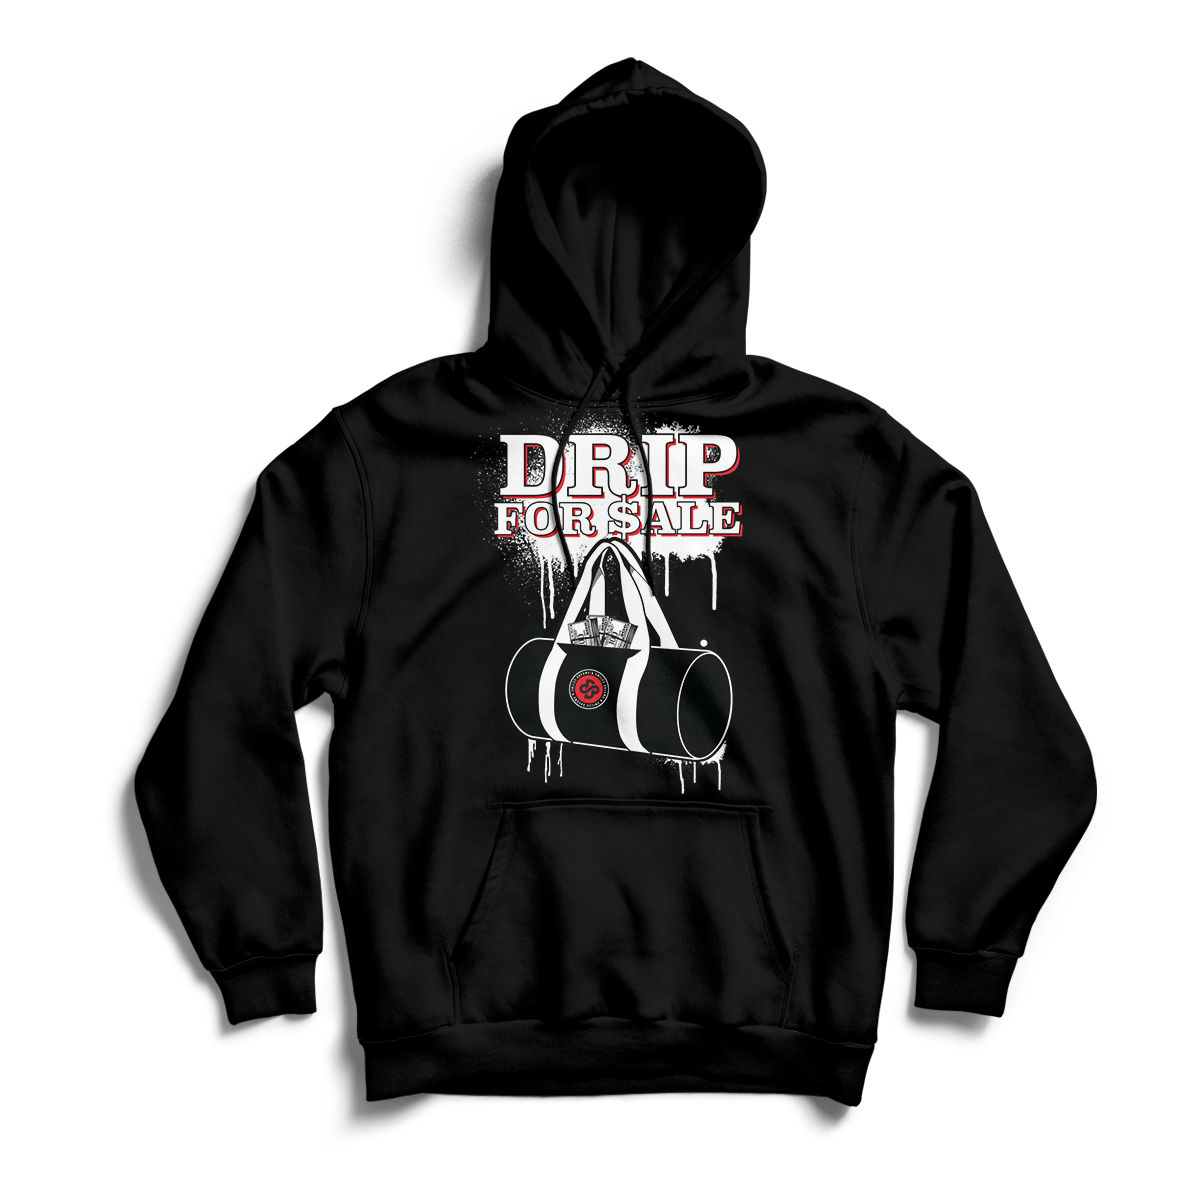 'Drip For Sale' in Reverse He Got Game CW Unisex Pullover Hoodie